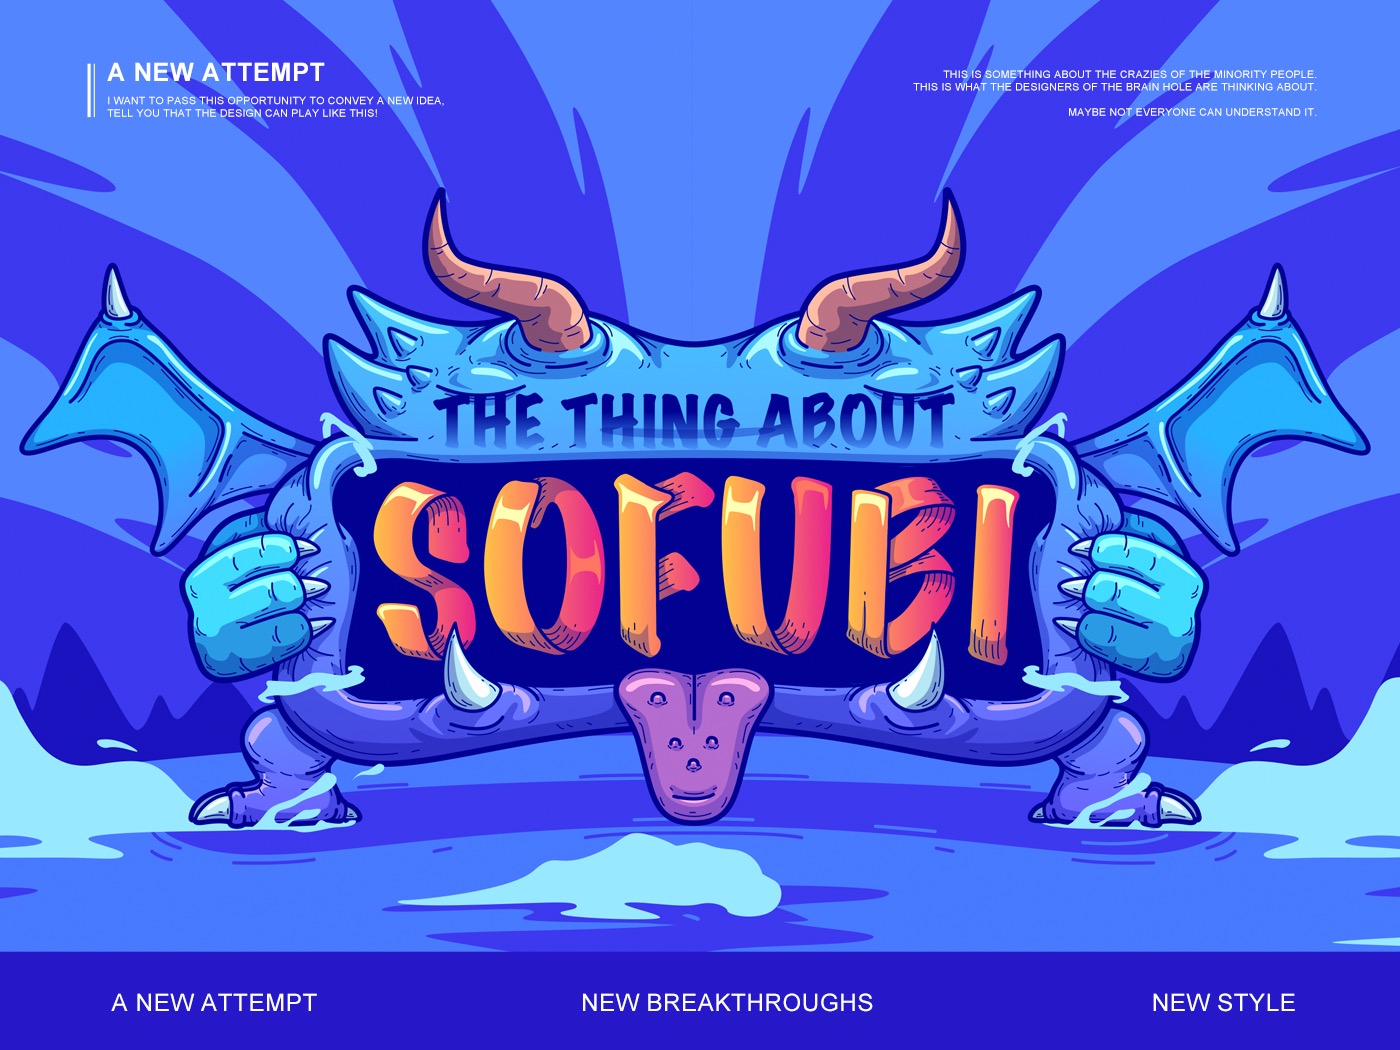 THE THING OF SOFUBI